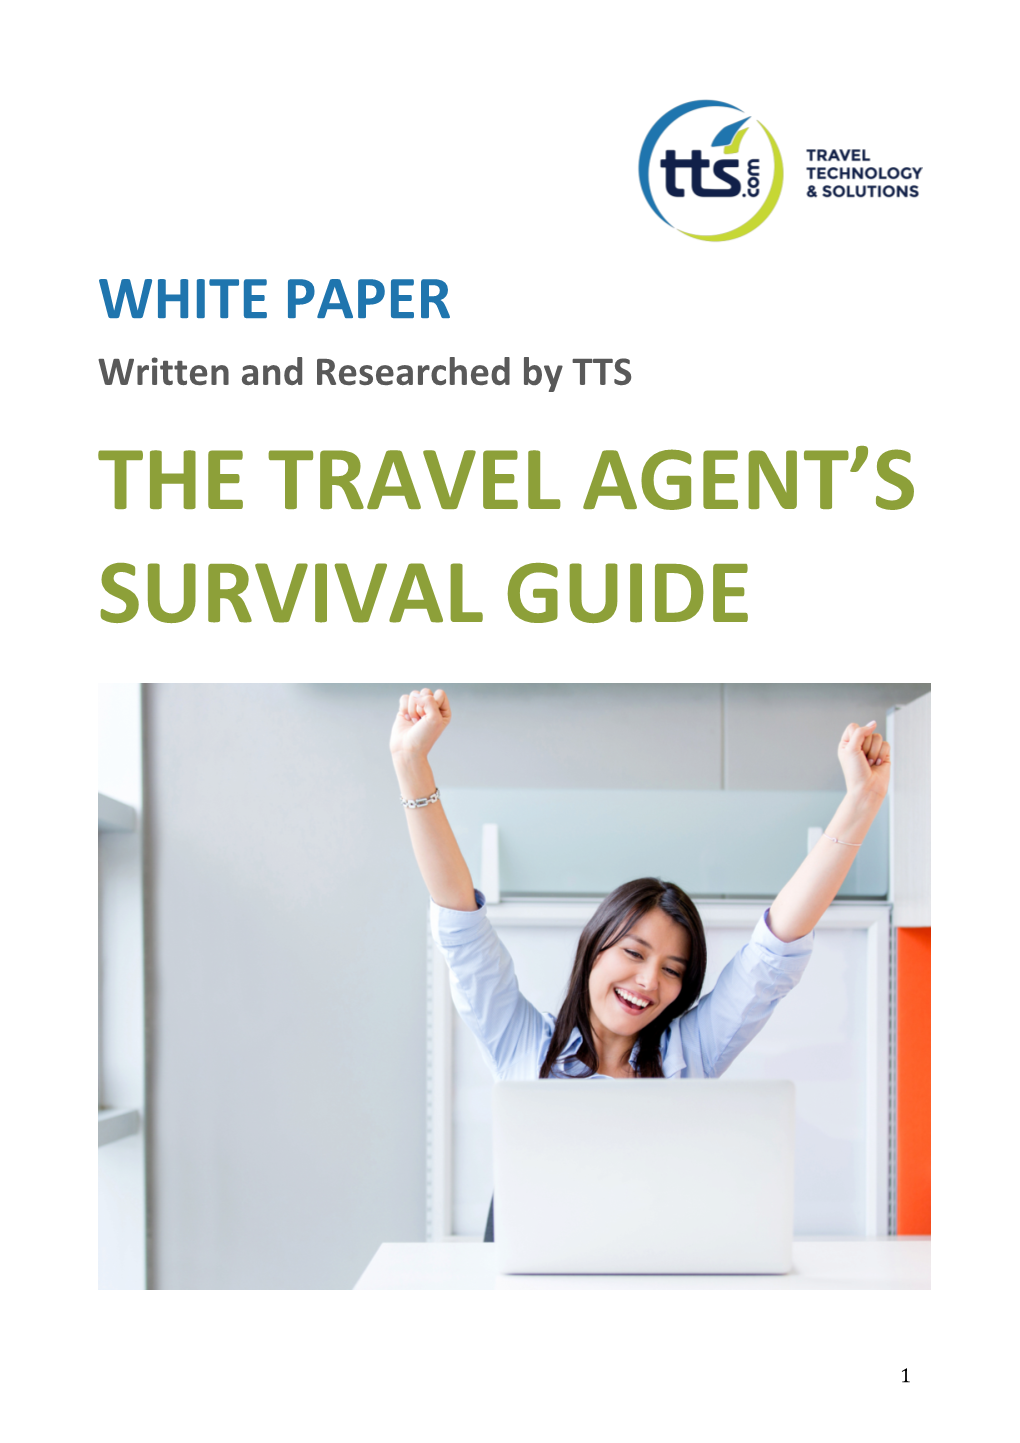 The Travel Agent's Survival Guide